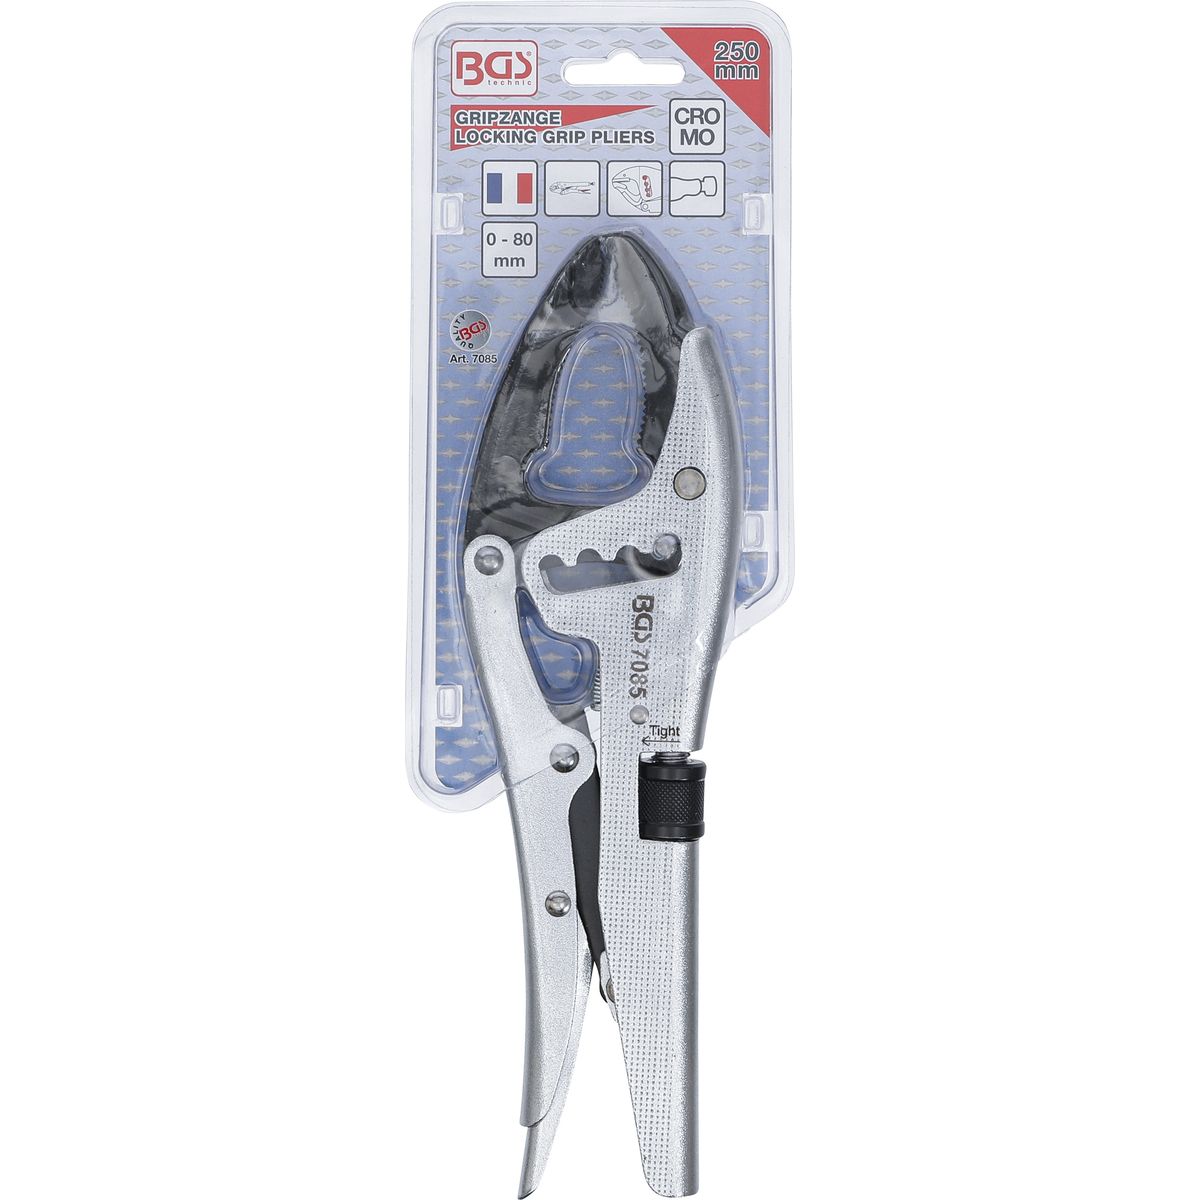 Locking Grip Pliers | 4-way Adjustable | Deep Offset Jaw | French Type | 250 mm